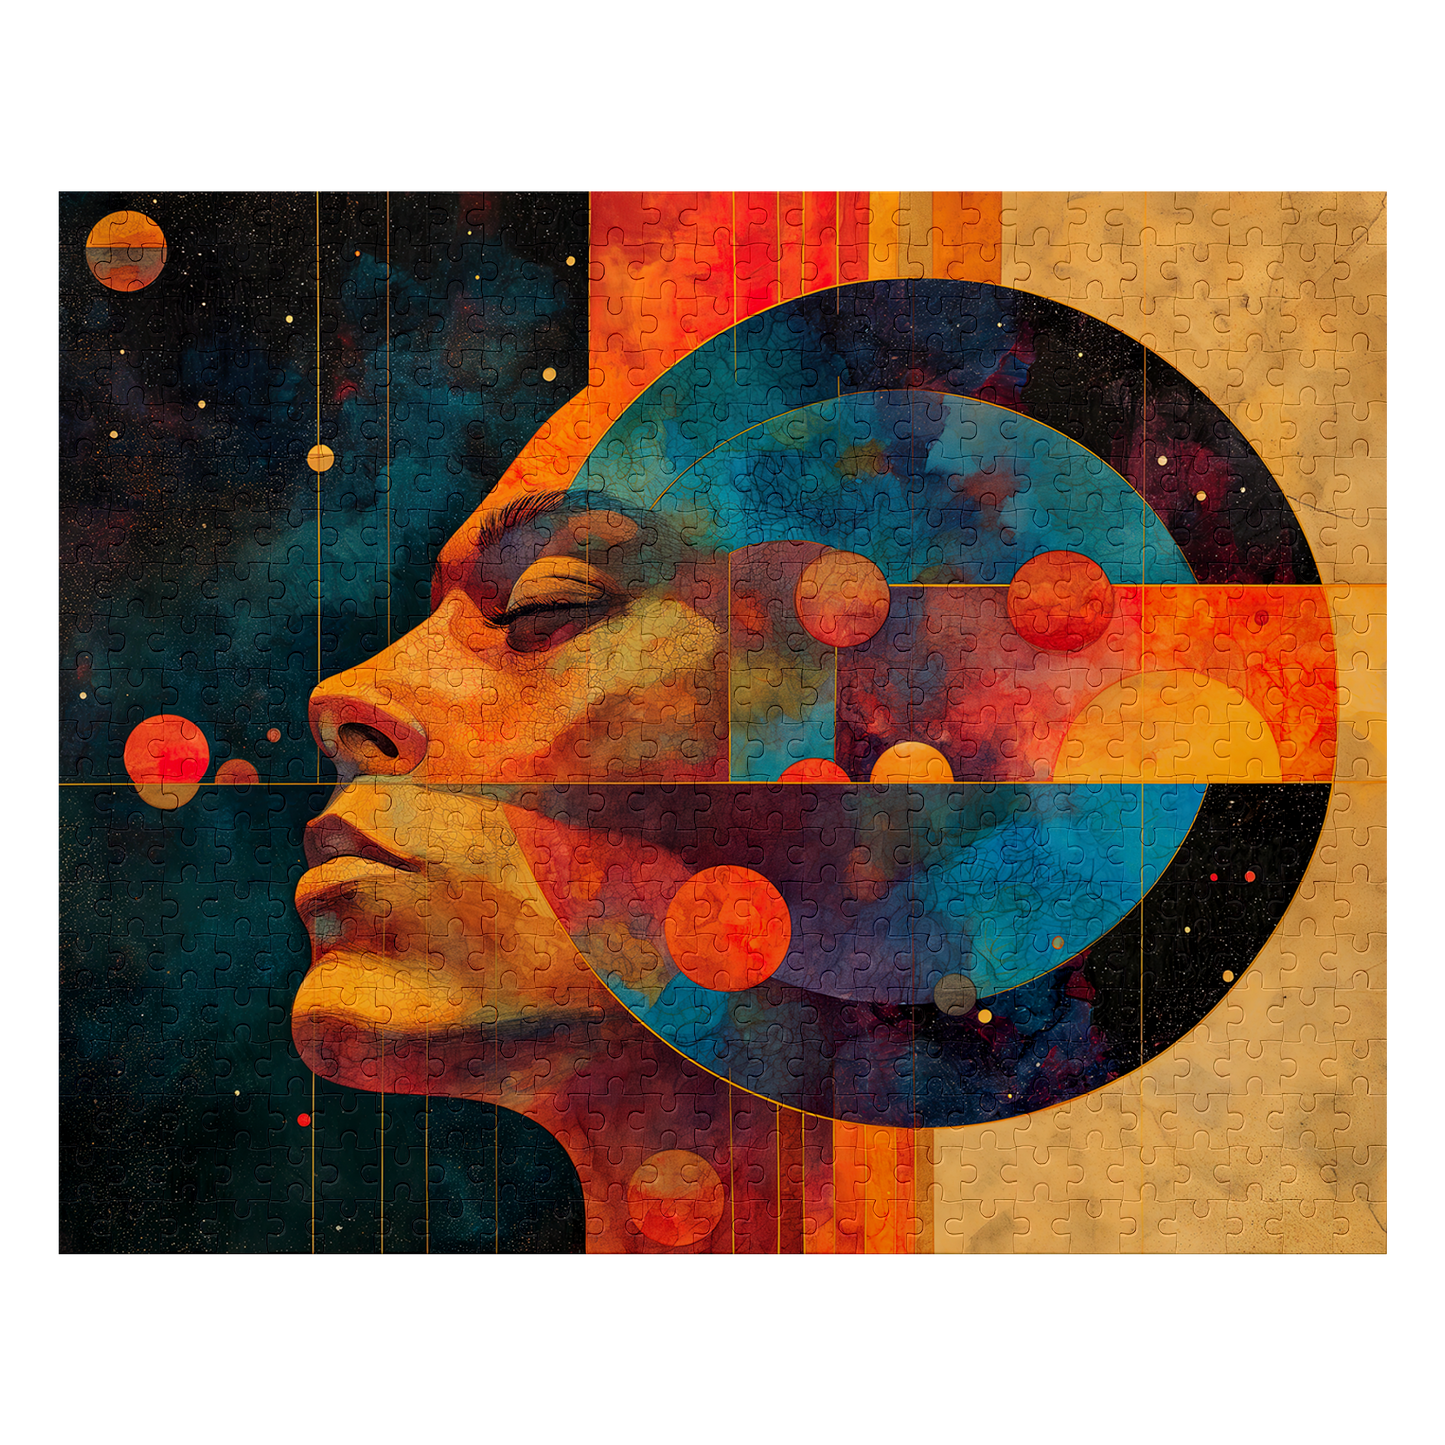 Deep Thought - Premium Jigsaw Puzzle, Vibrant, Sci-fi - Multiple Sizes Available